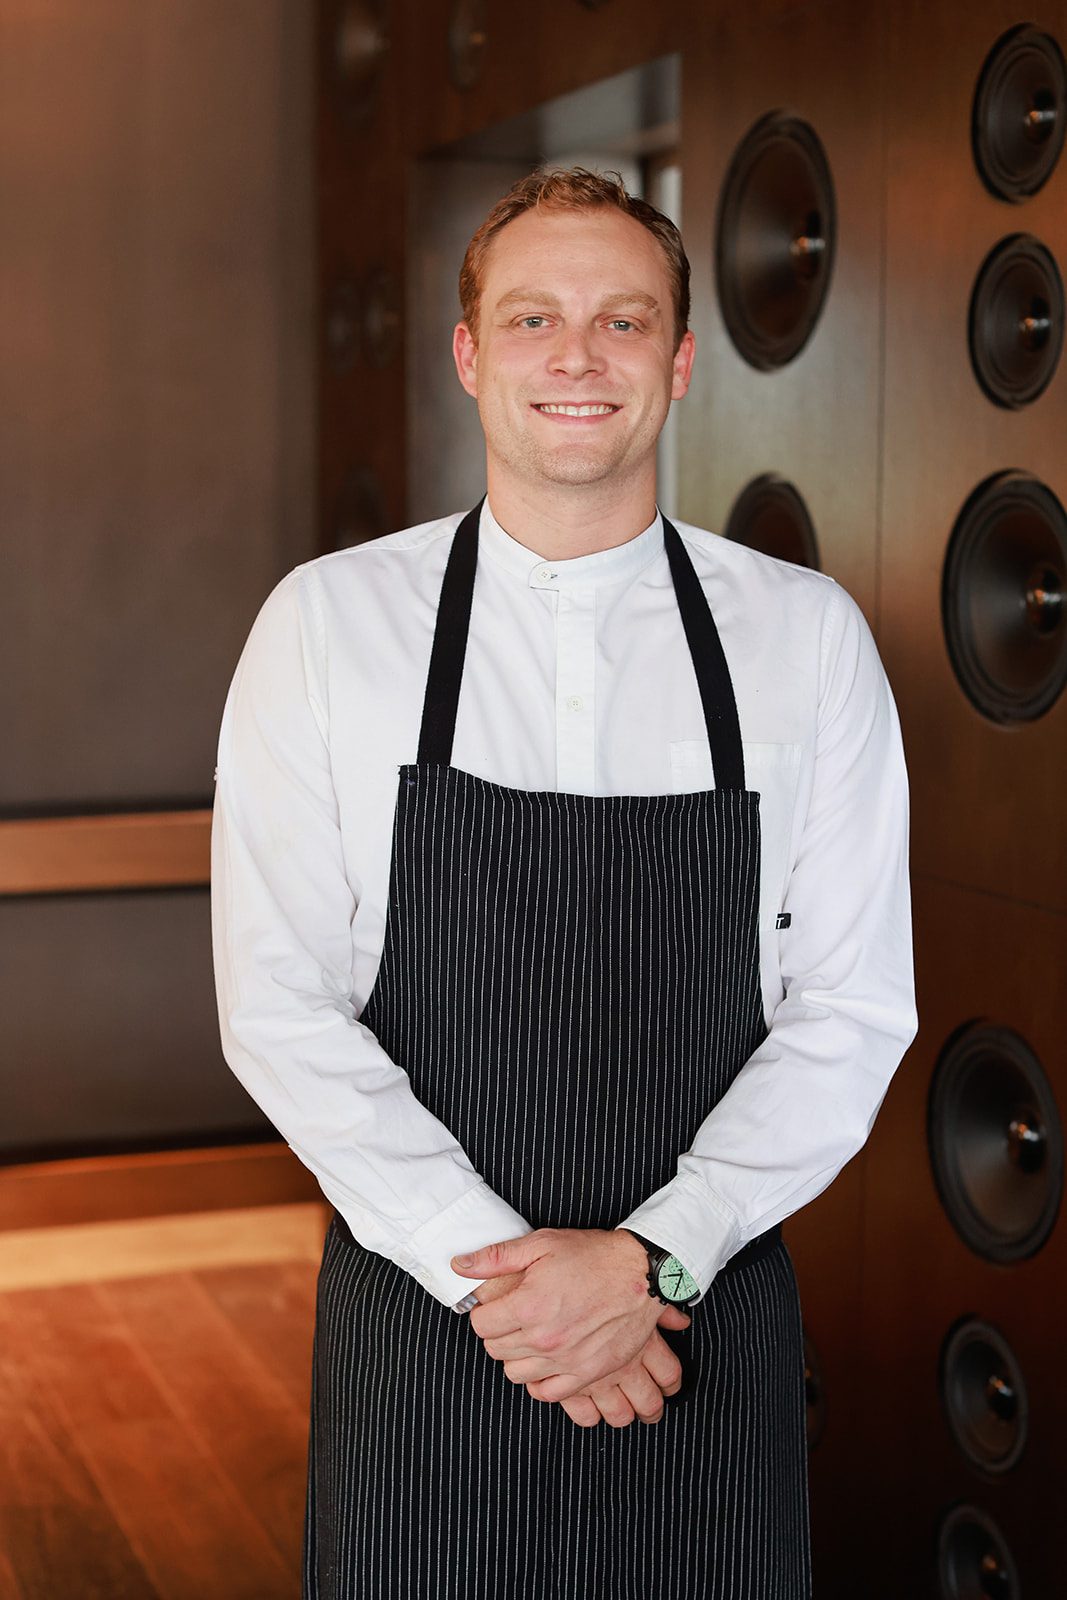 W Hotel Nashville_Chef Levi Raines promoted to oversee Andrew Carmellini restaurants within W Nashville hotel